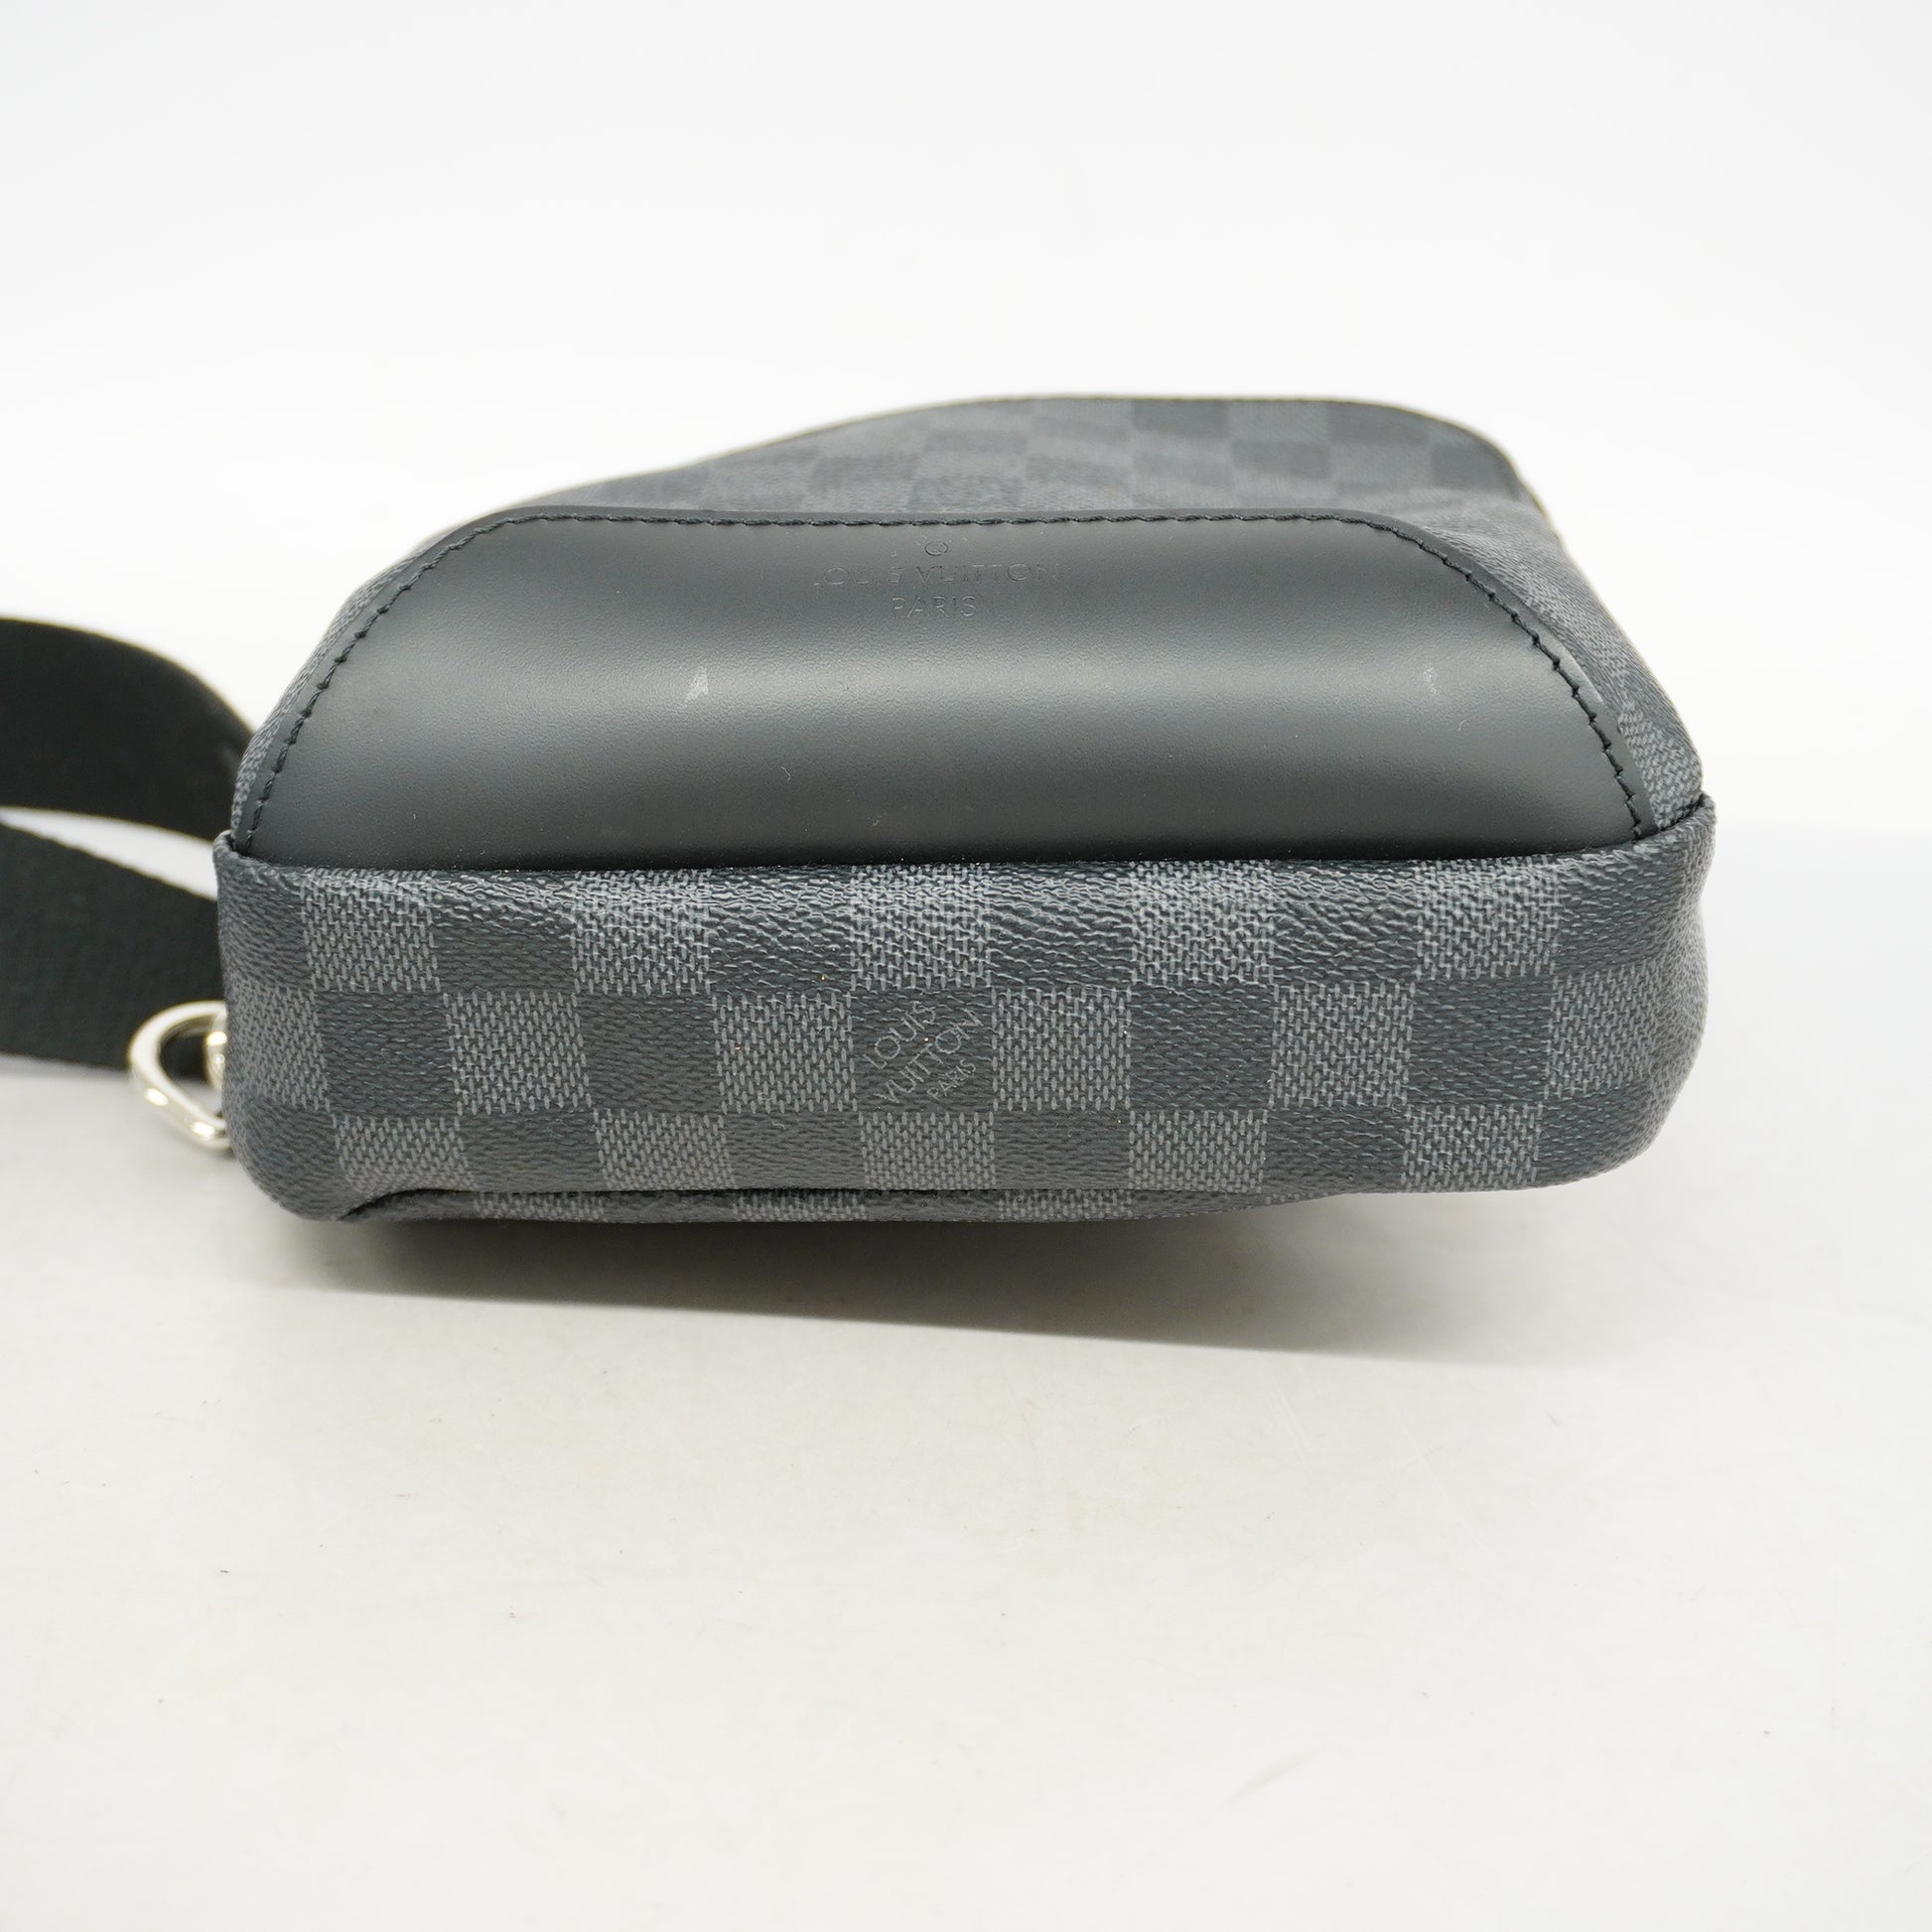 Shop Louis Vuitton DAMIER GRAPHITE New Pouch (N60417) by sunnyfunny